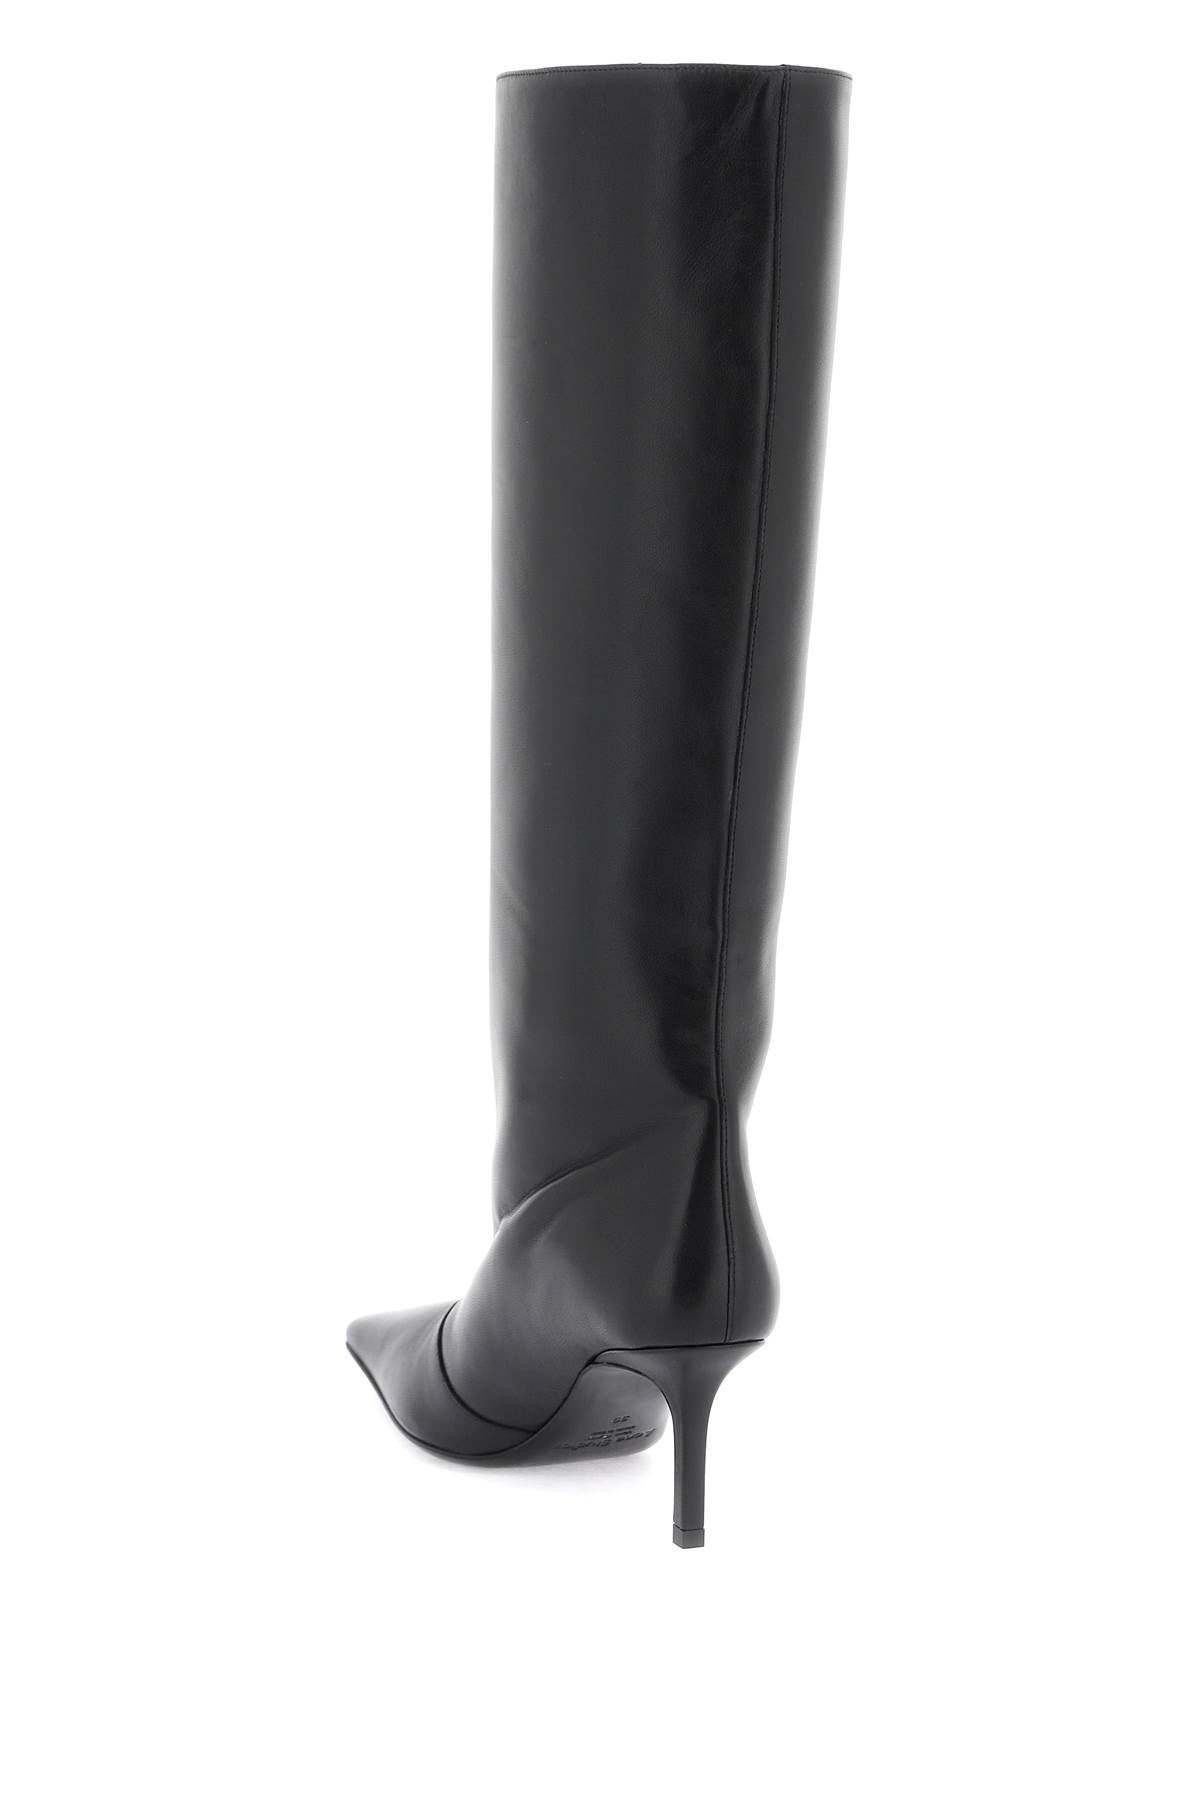 ACNE STUDIOS Black Leather Boots with a Sleek Design for Women - SS24